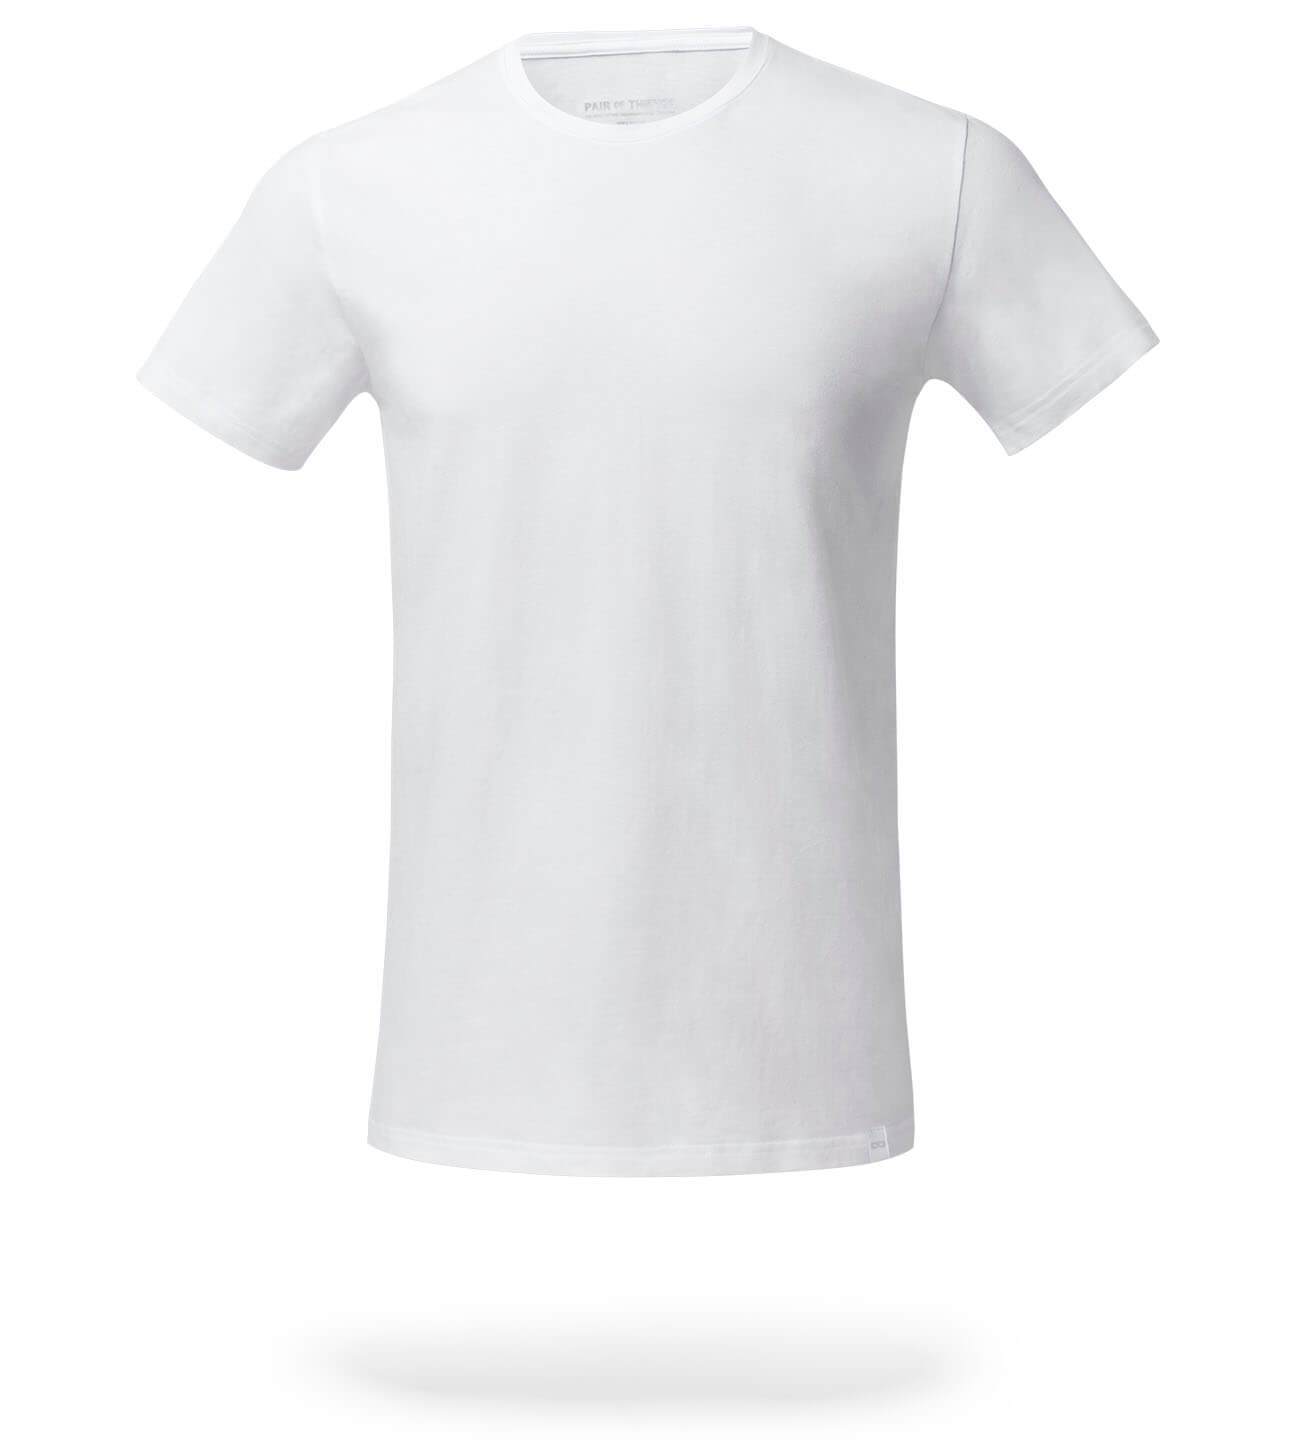 The Solid Plain White SuperSoft Crew Neck Undershirt – Pair of Thieves